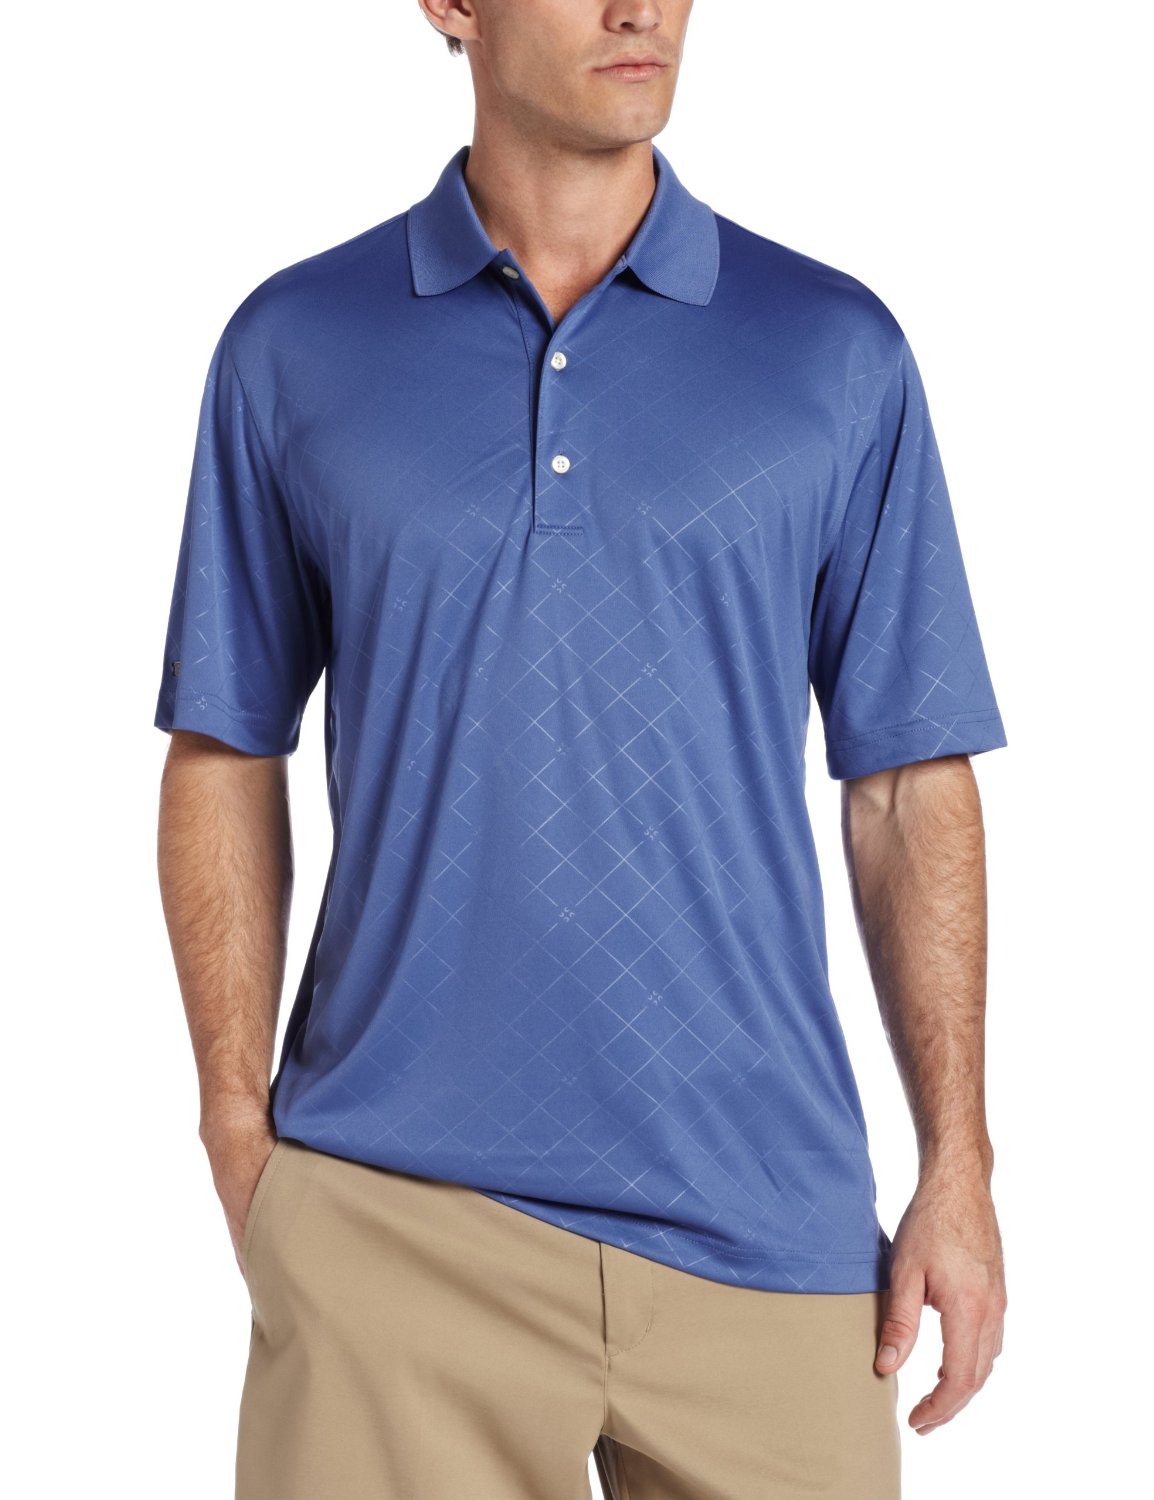 Greg Norman Imperial Embossed Golf Polo Shirts